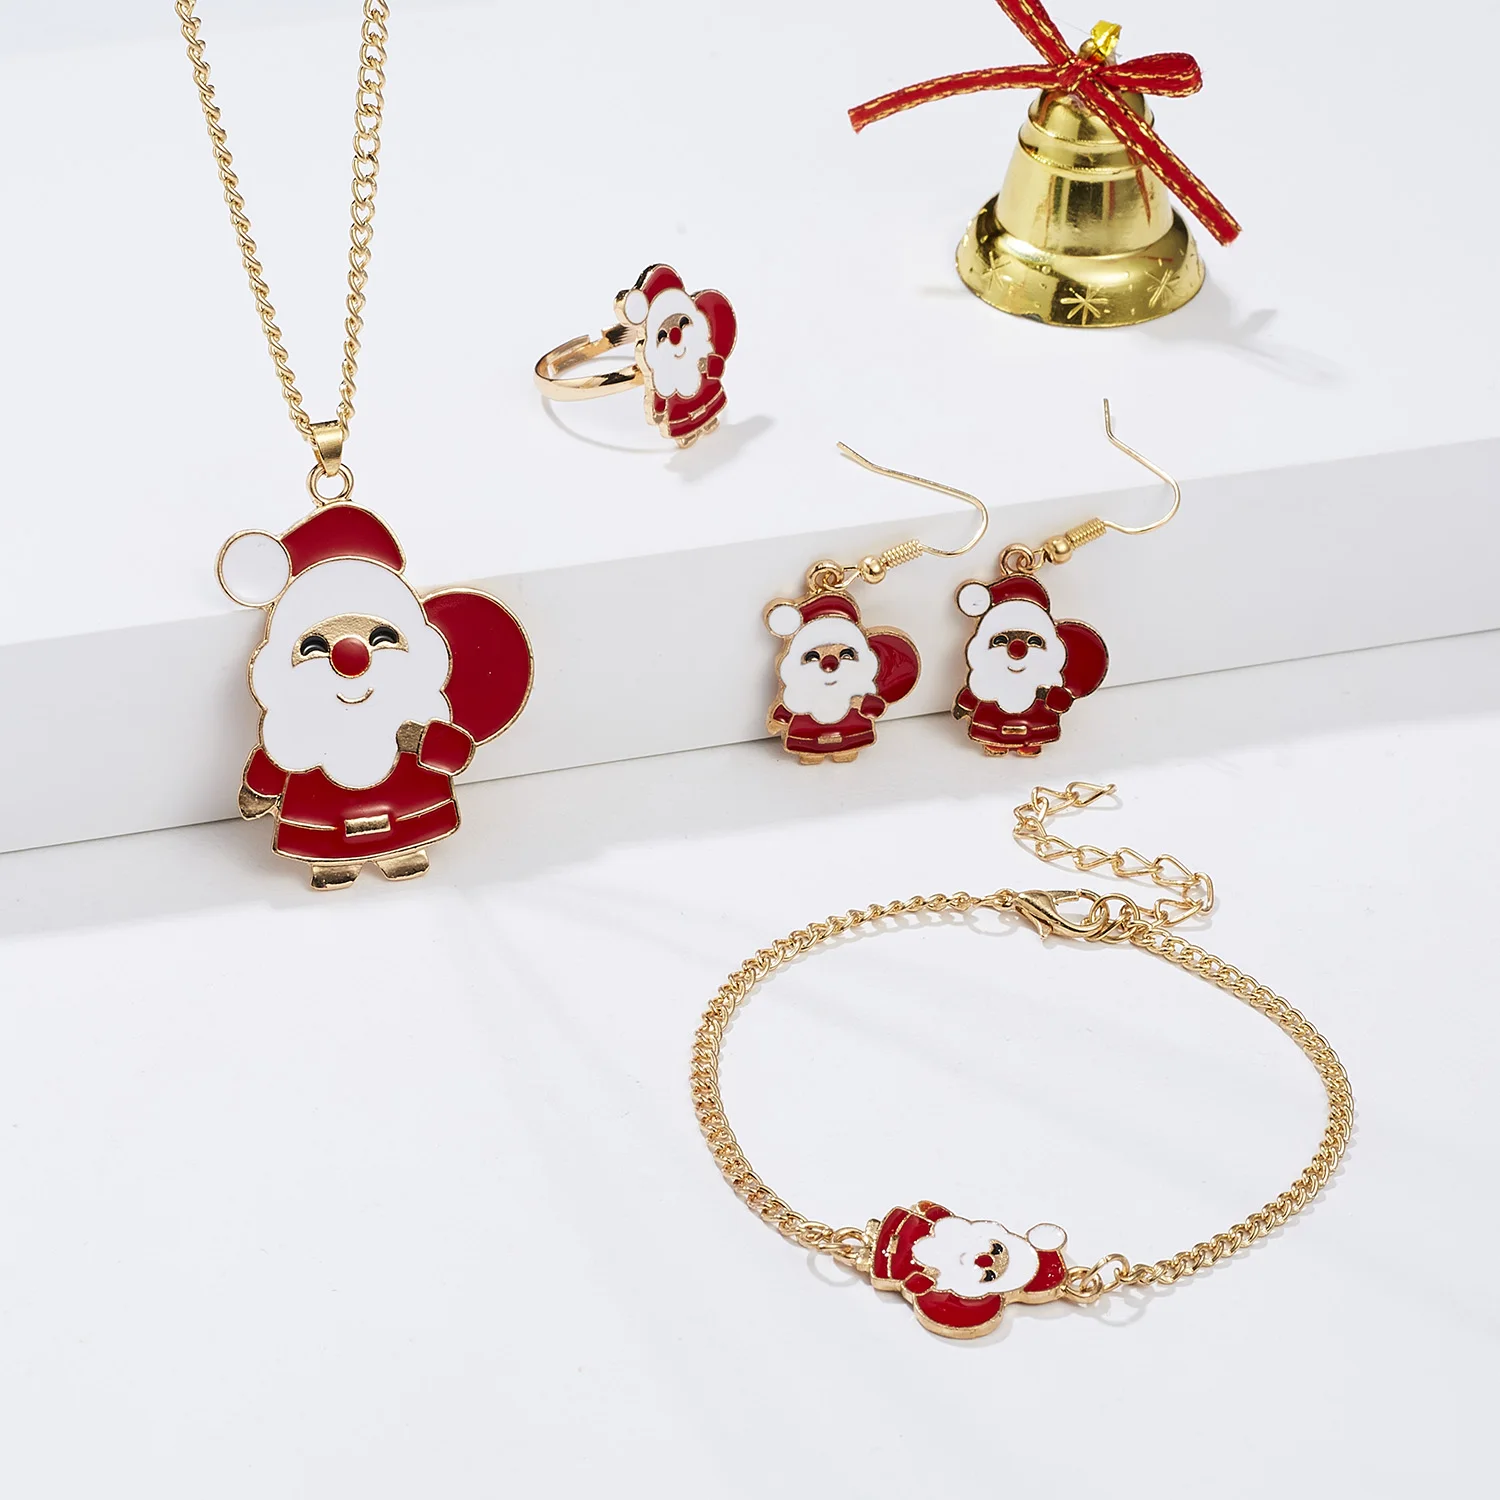 

4pcs/set Christmas Bells Snowman Painting Oil Necklace Earrings Bracelet Ring Alloy Christmas Jewelry Set, Picture shows